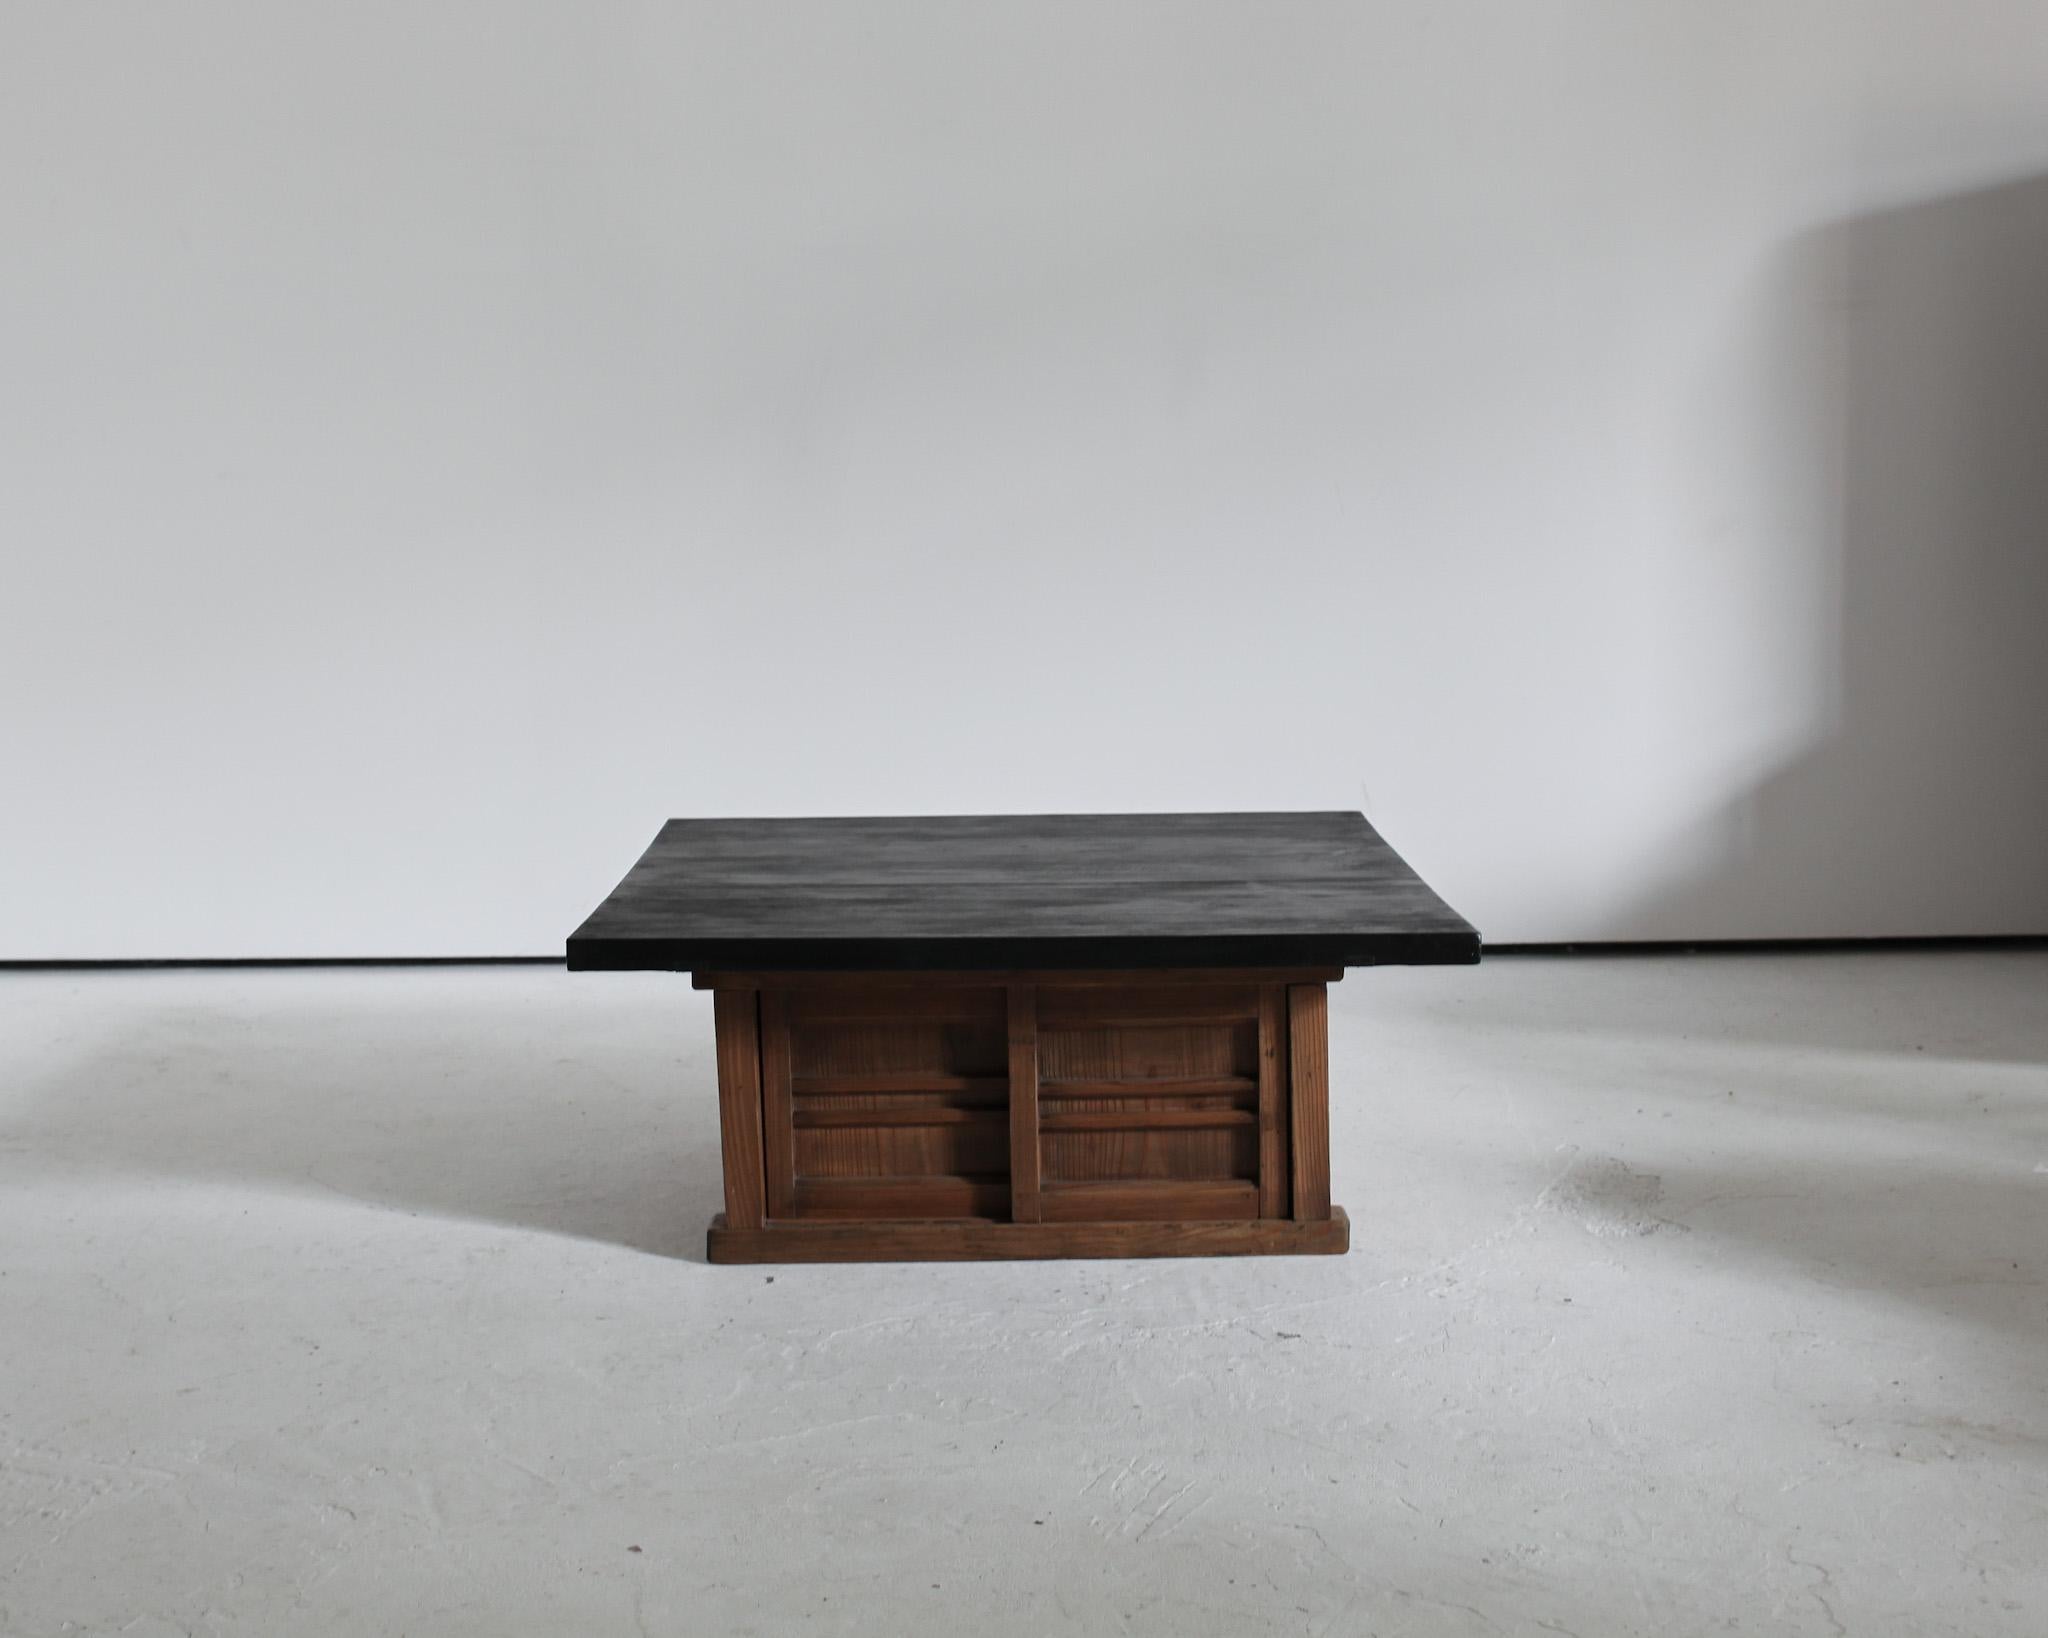 Charred cedar top on late 19th century. Two door cedar tansu base.
Good strong design with ample storage.
Made using 19th century. Japanese elements in our London workshop.